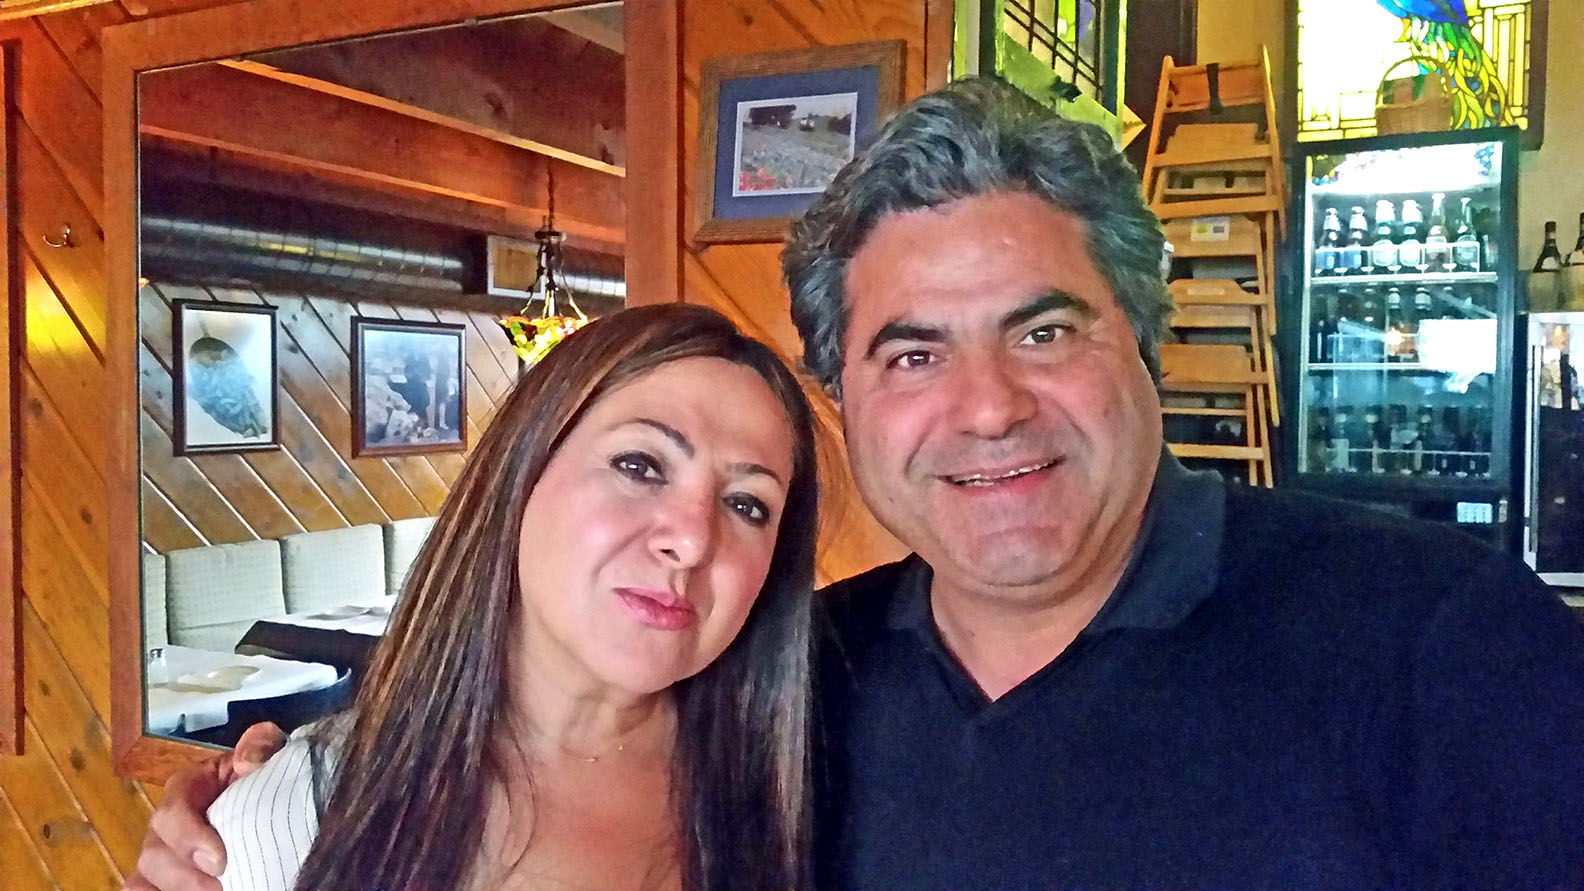 about Talayna's Italian Restaurant – owners  Mehdi and Susan Rouhani